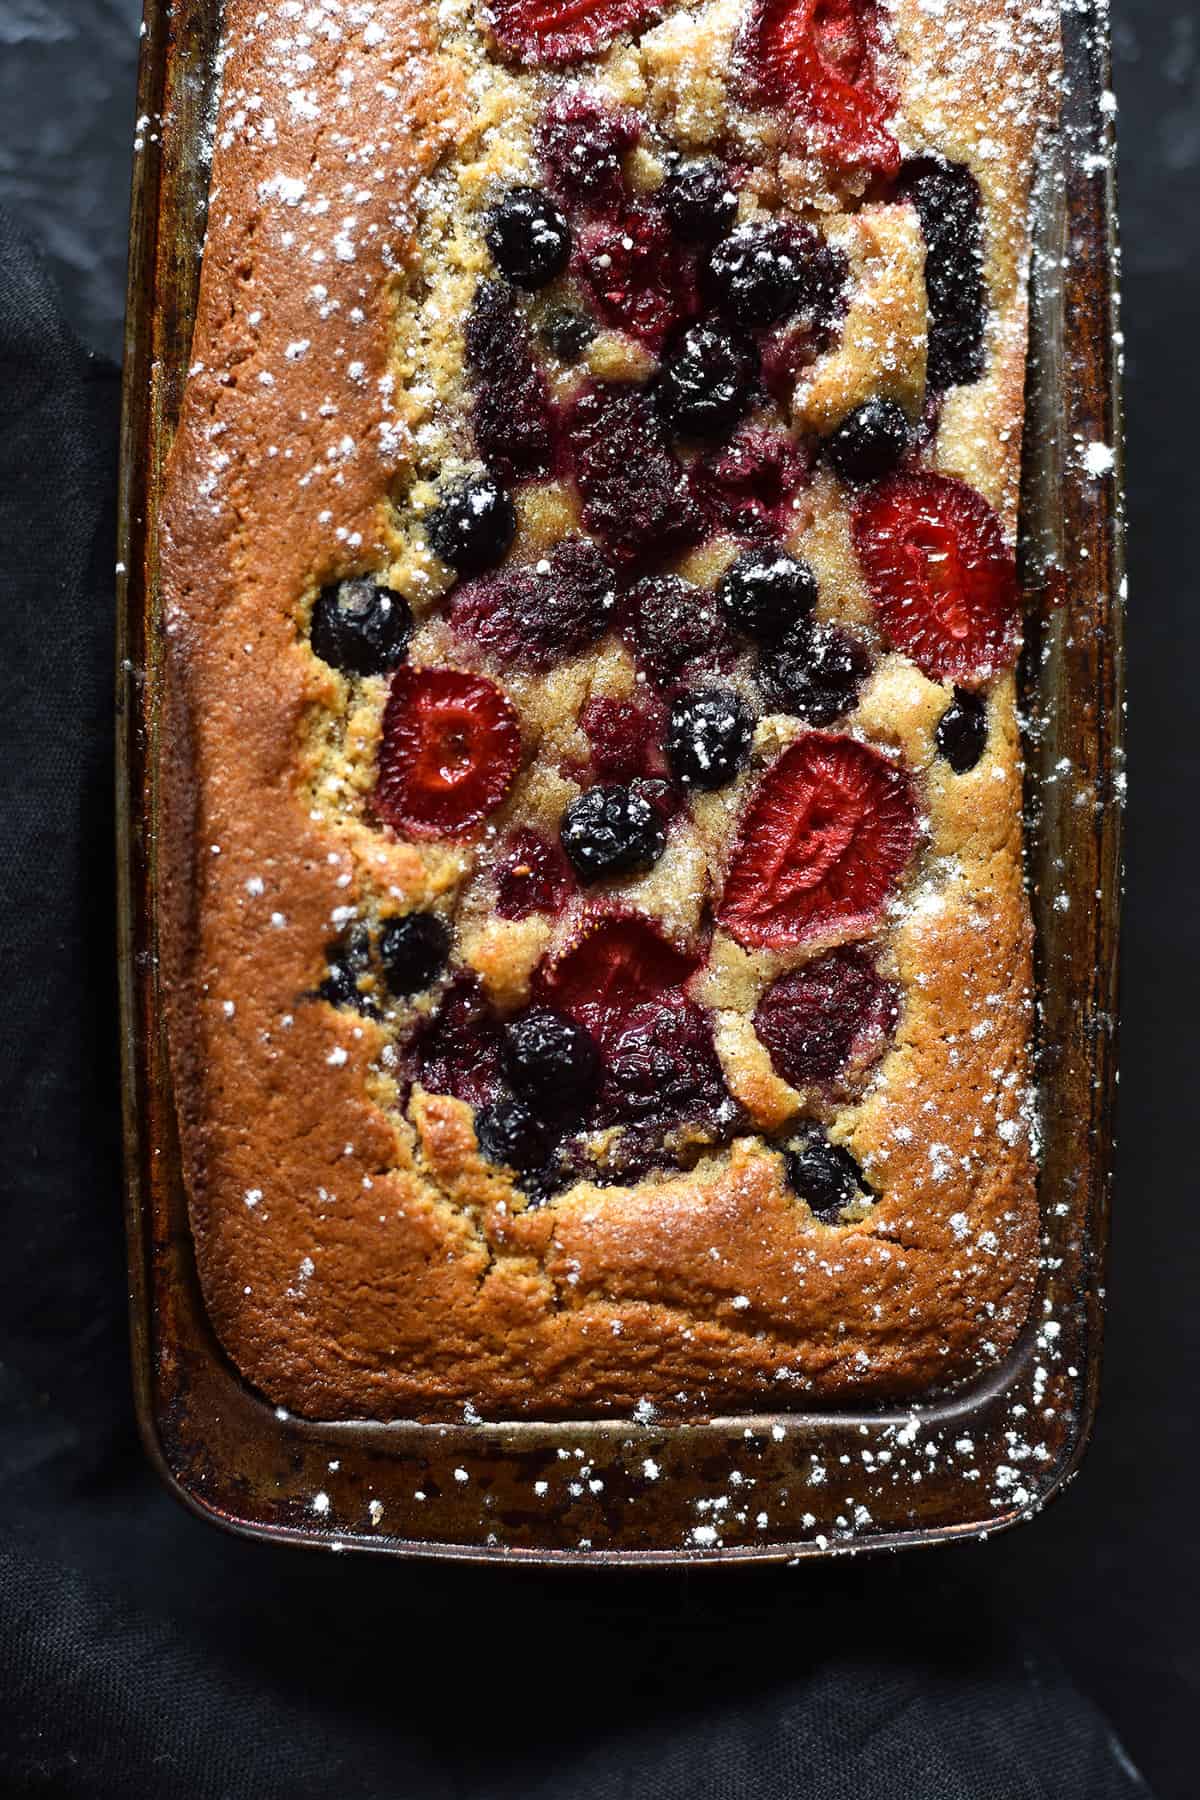 An aerial, close up view of a grain free vanilla coconut cake topped with mixed berries. The loaf sits in a baking tin on a dark backdrop